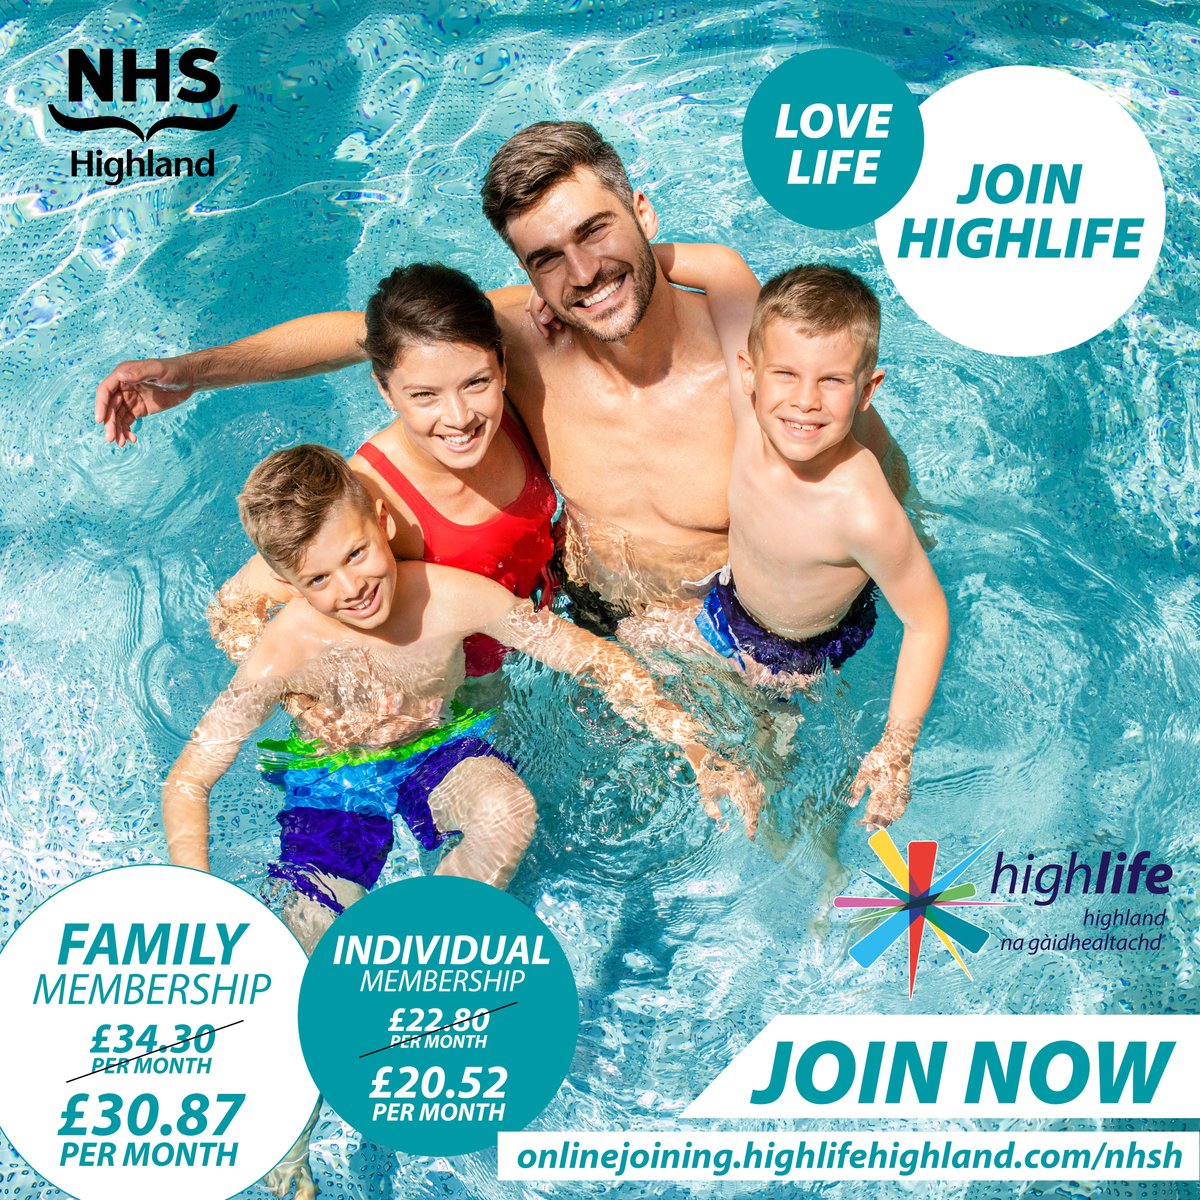 All NHS Highland staff are entitled to a 10% discount on a Highlife membership. Benefit from a range of facilities and activities, as well as further discounts on many local services, by joining today: bit.ly/3CQ7jms #LoveLifeJoinHighlife